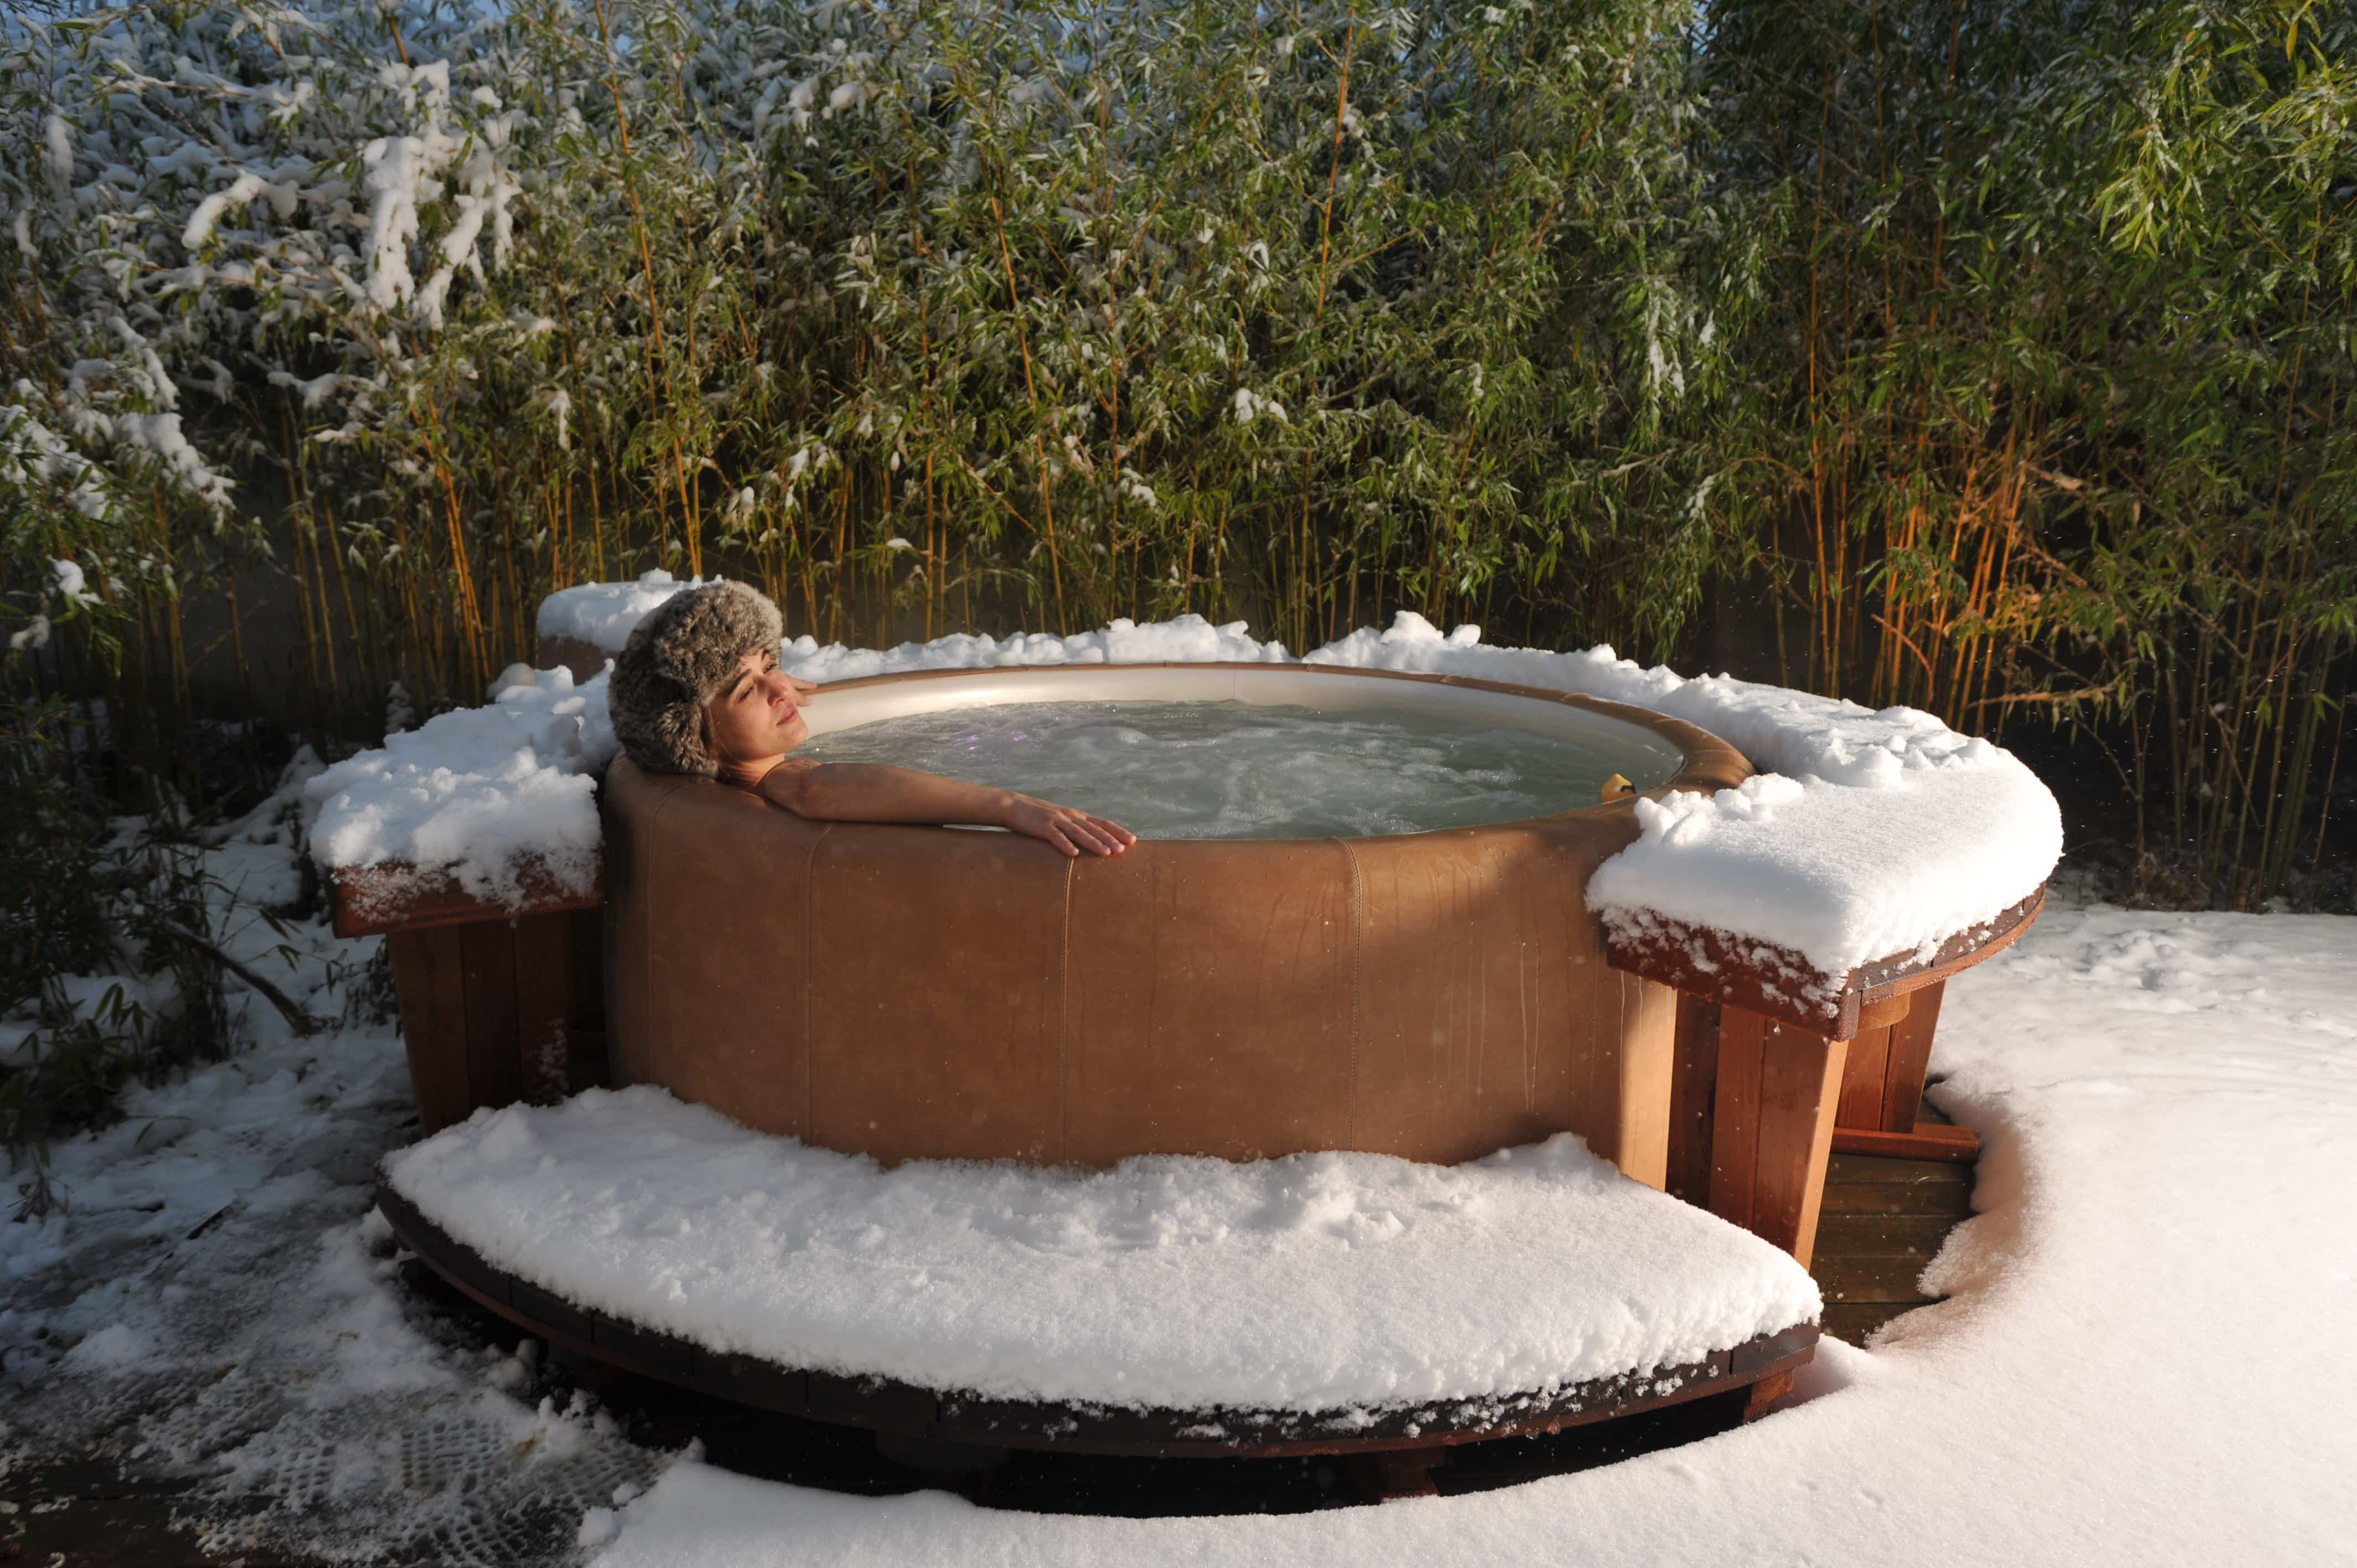 Choose a Softub Spa and Enjoy it Throughout the Winter Months